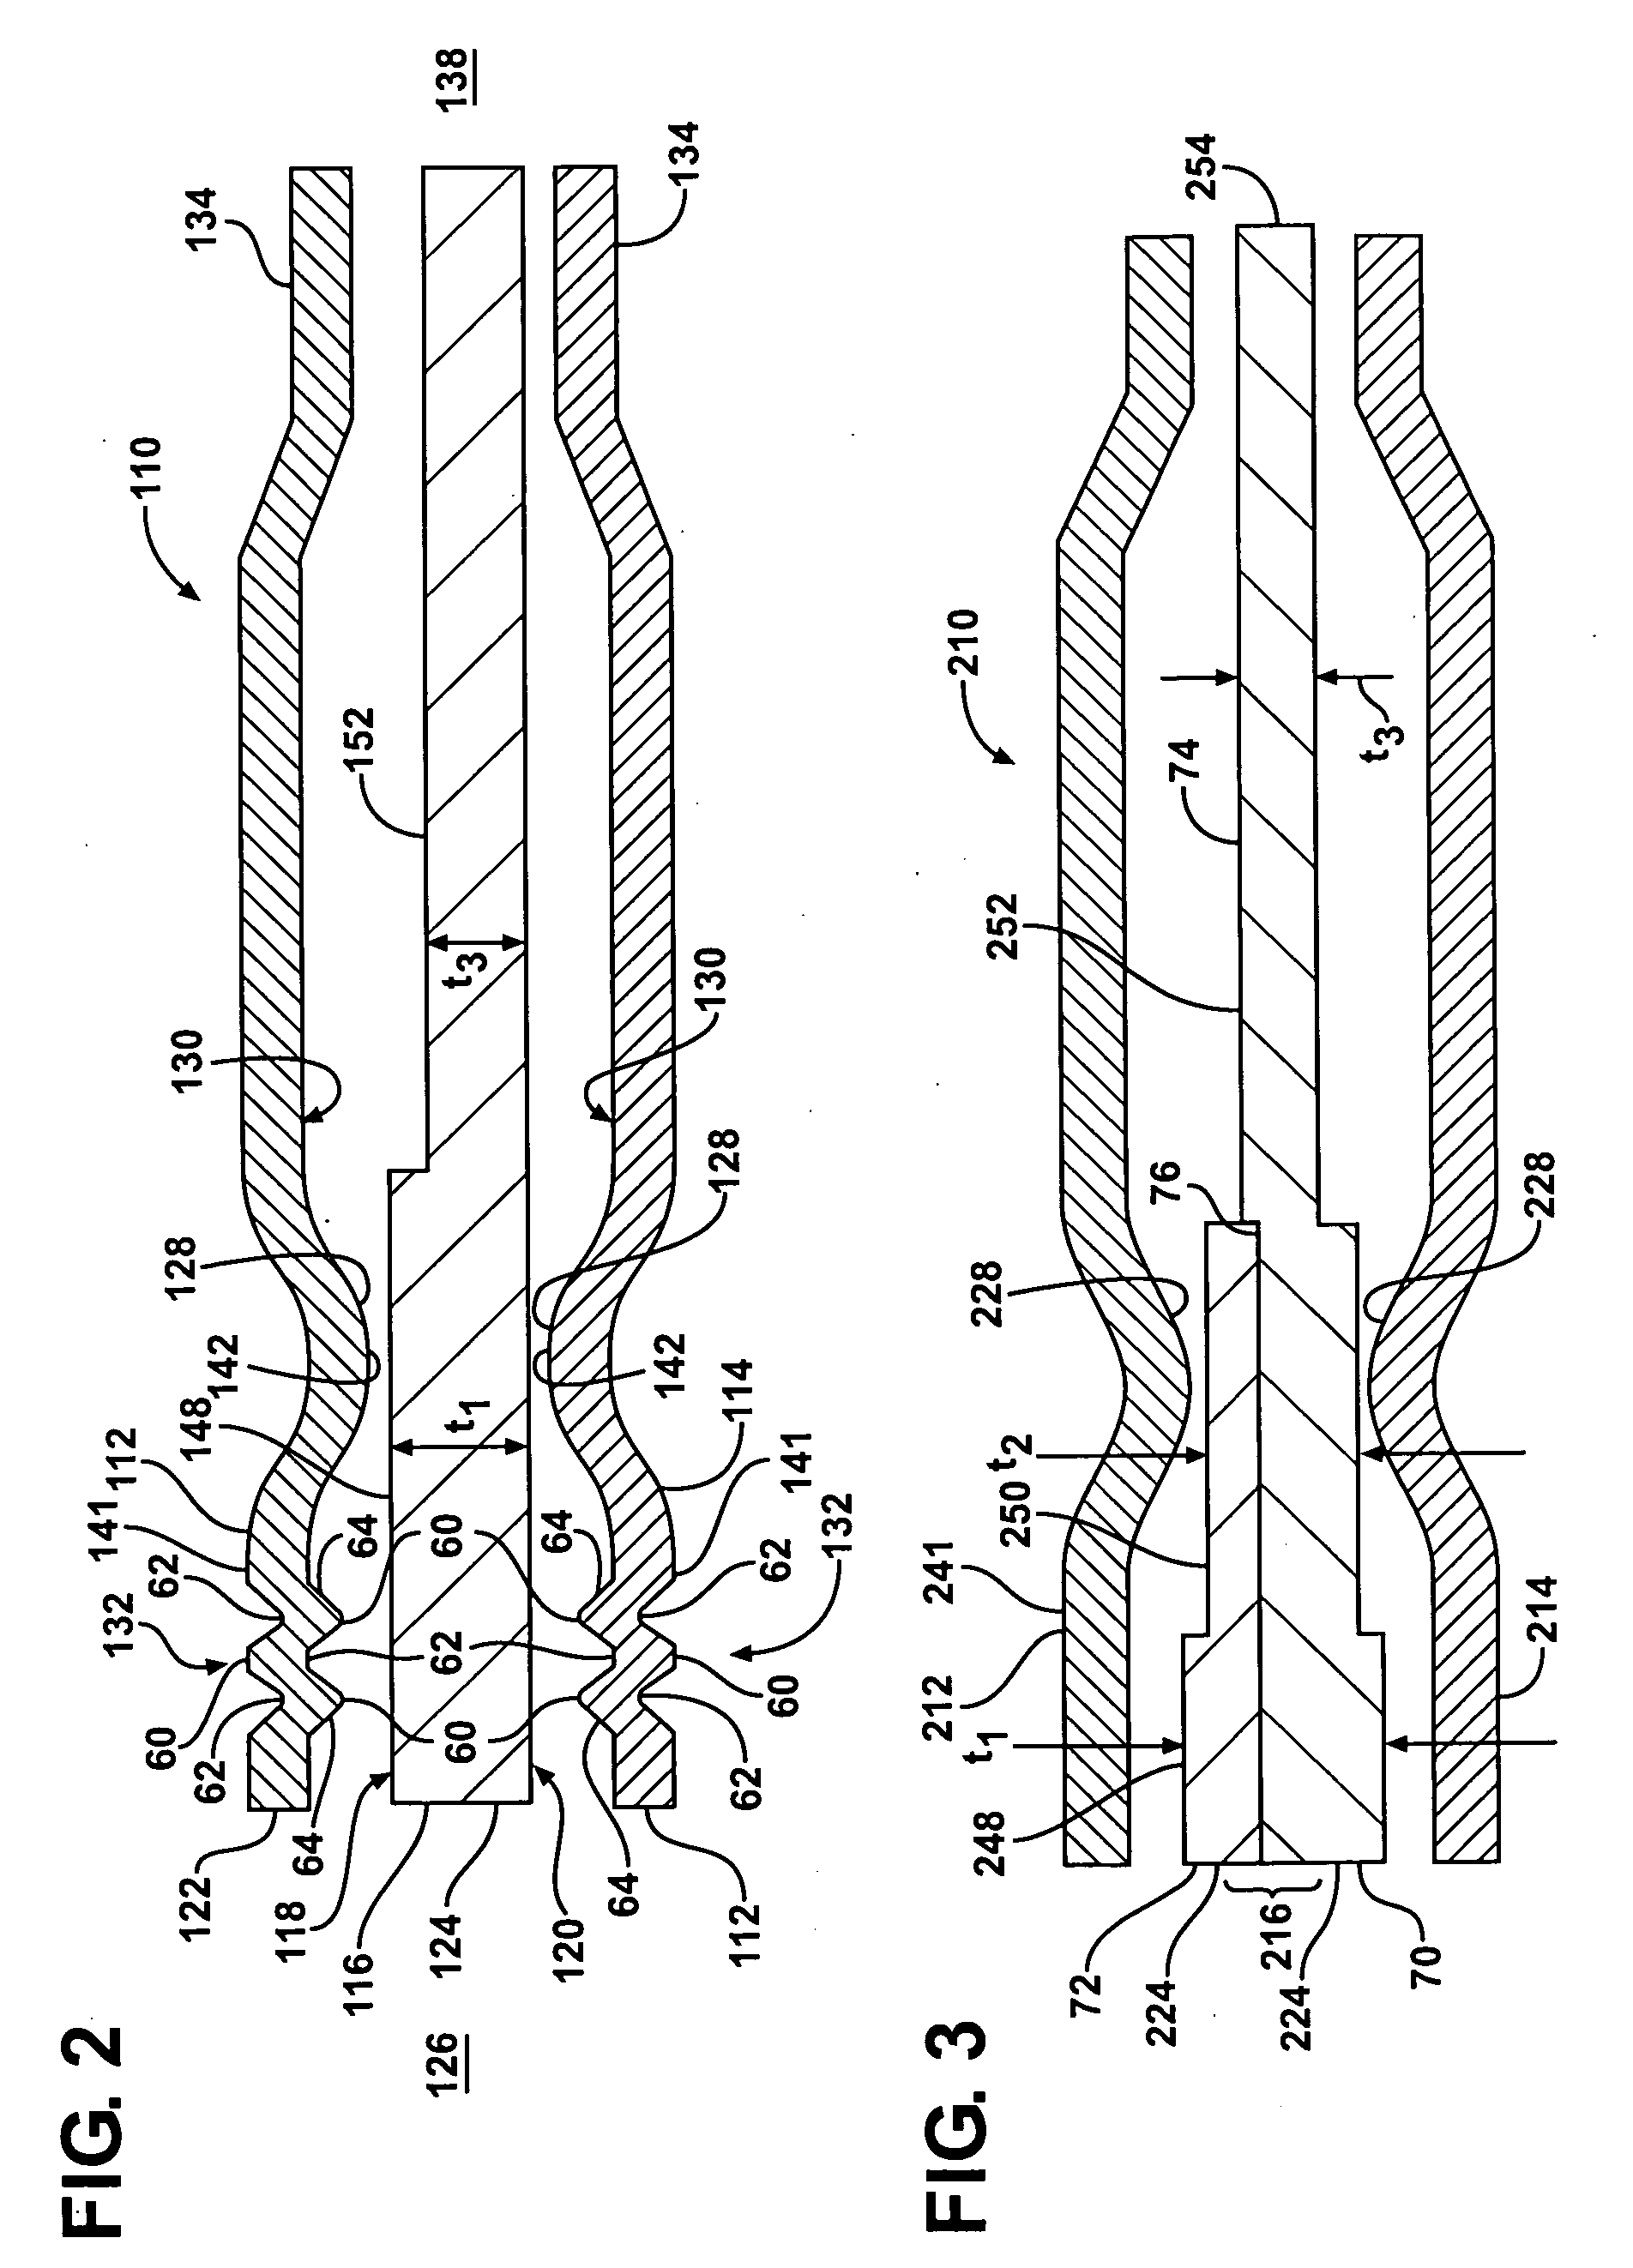 Multilayer static gasket with bead compression limiter